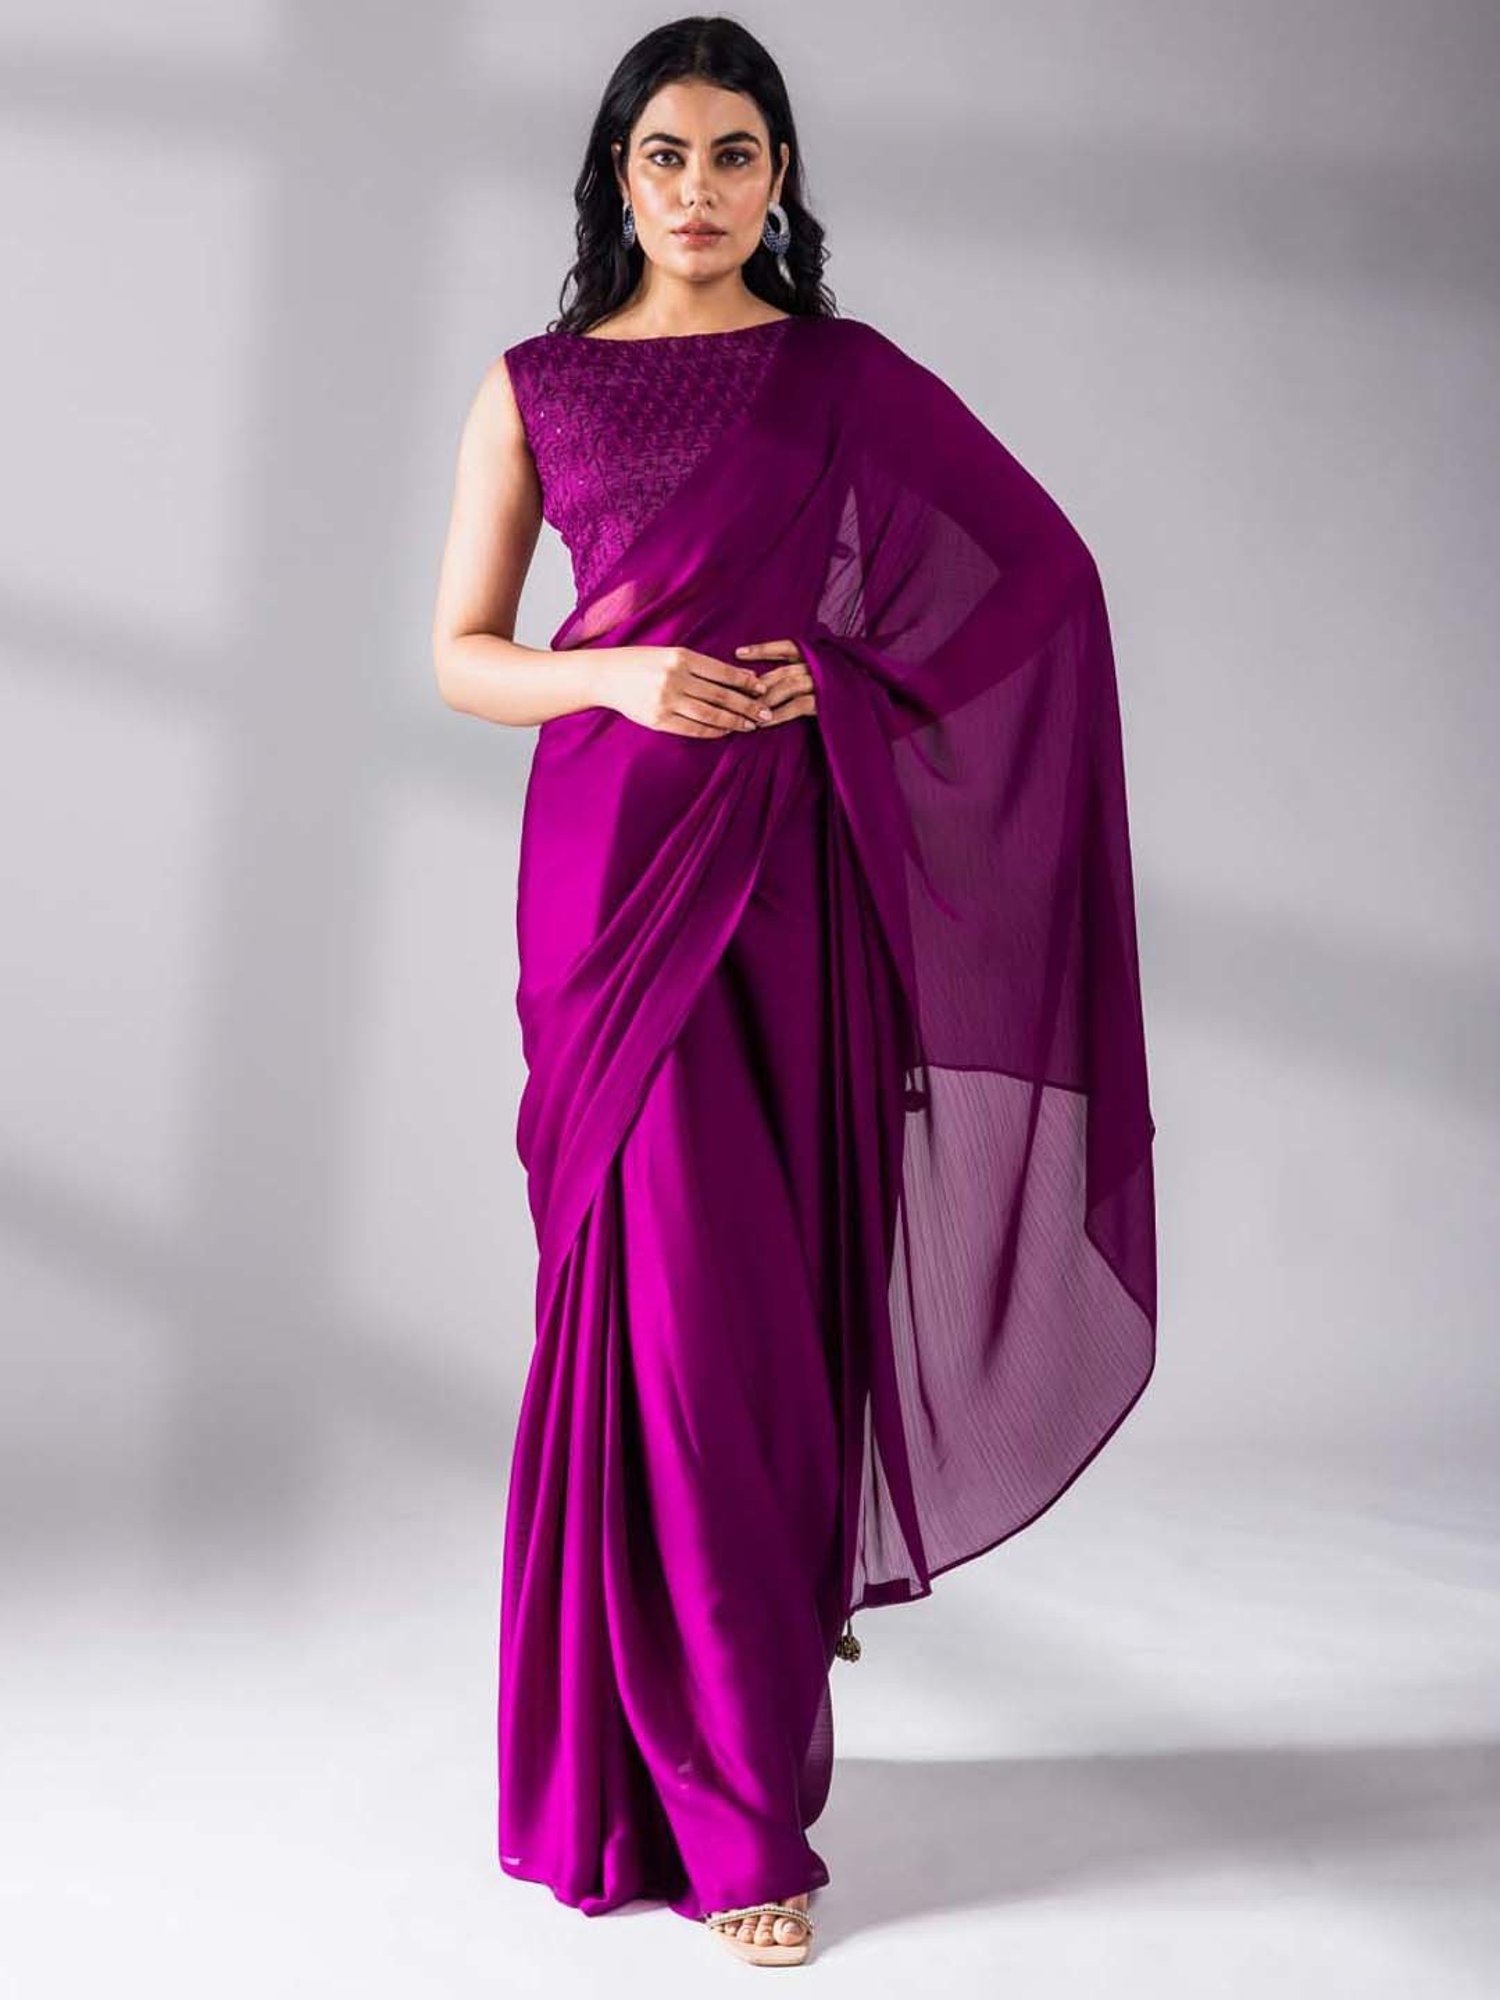 What is the best combination of purple shades Saree? - Quora